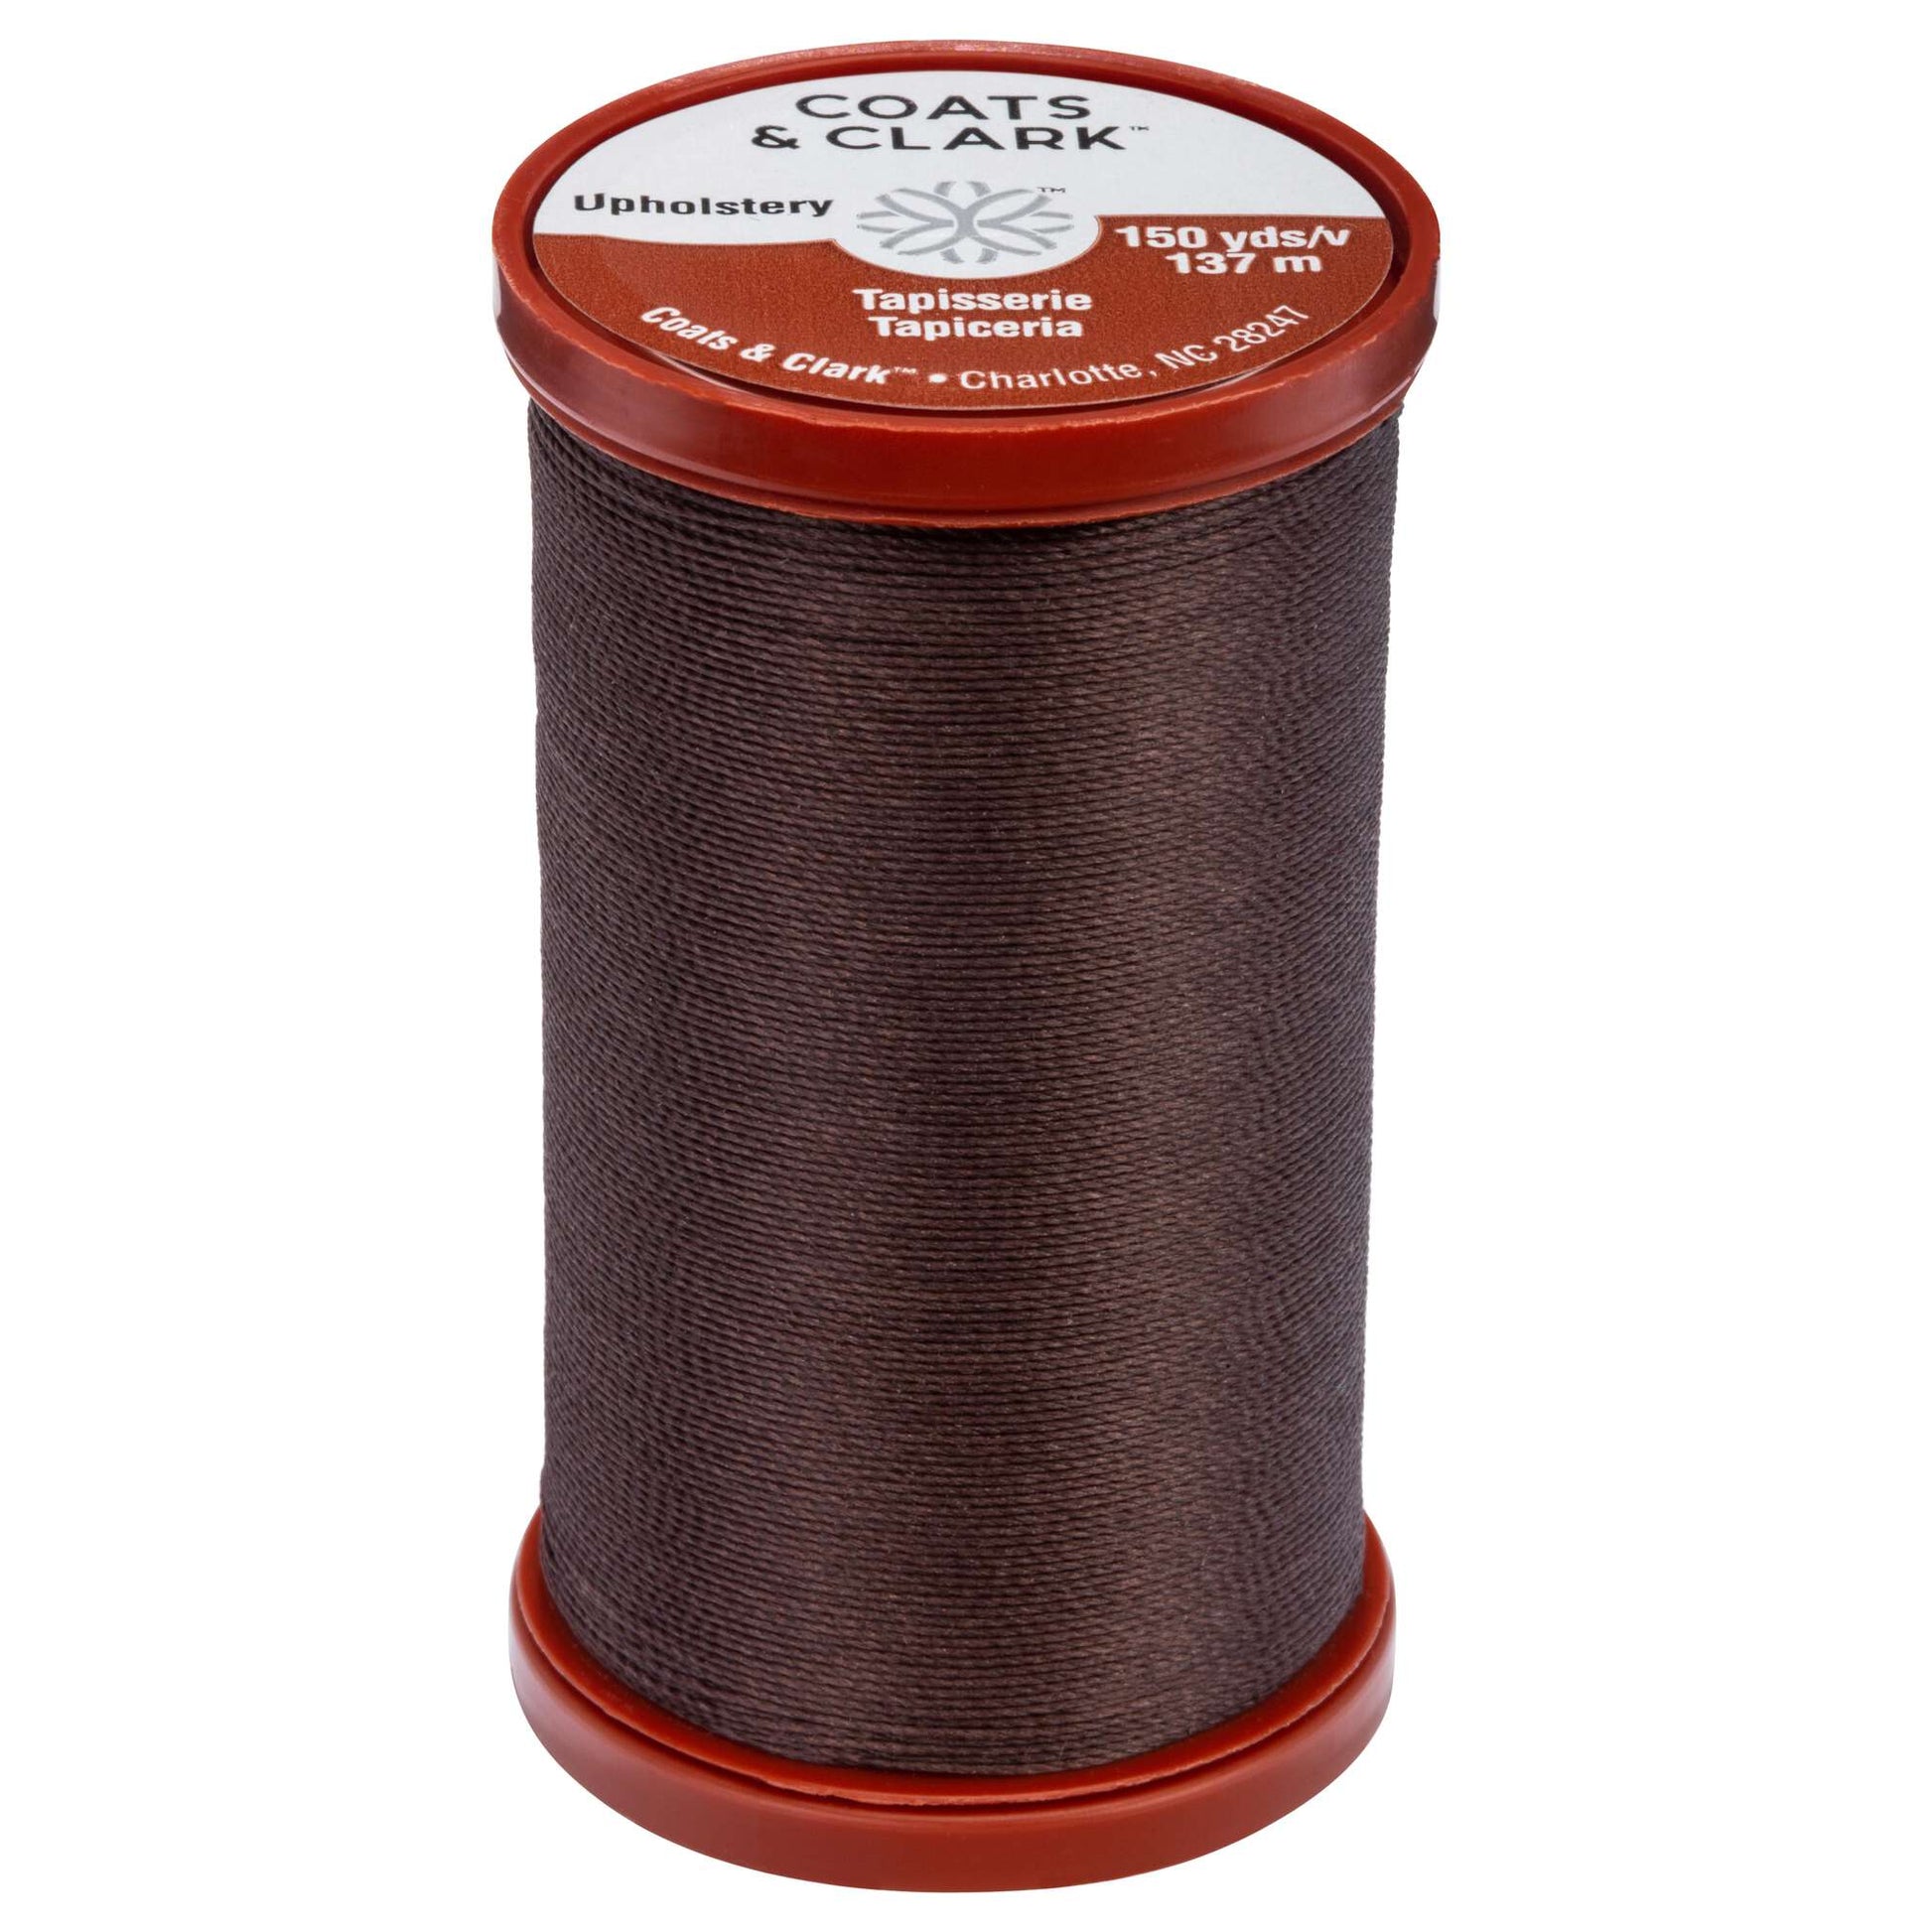 Coats & Clark Extra Strong & Upholstery Thread 150 Yards Chona Brown  S964-8960 (3-Pack)